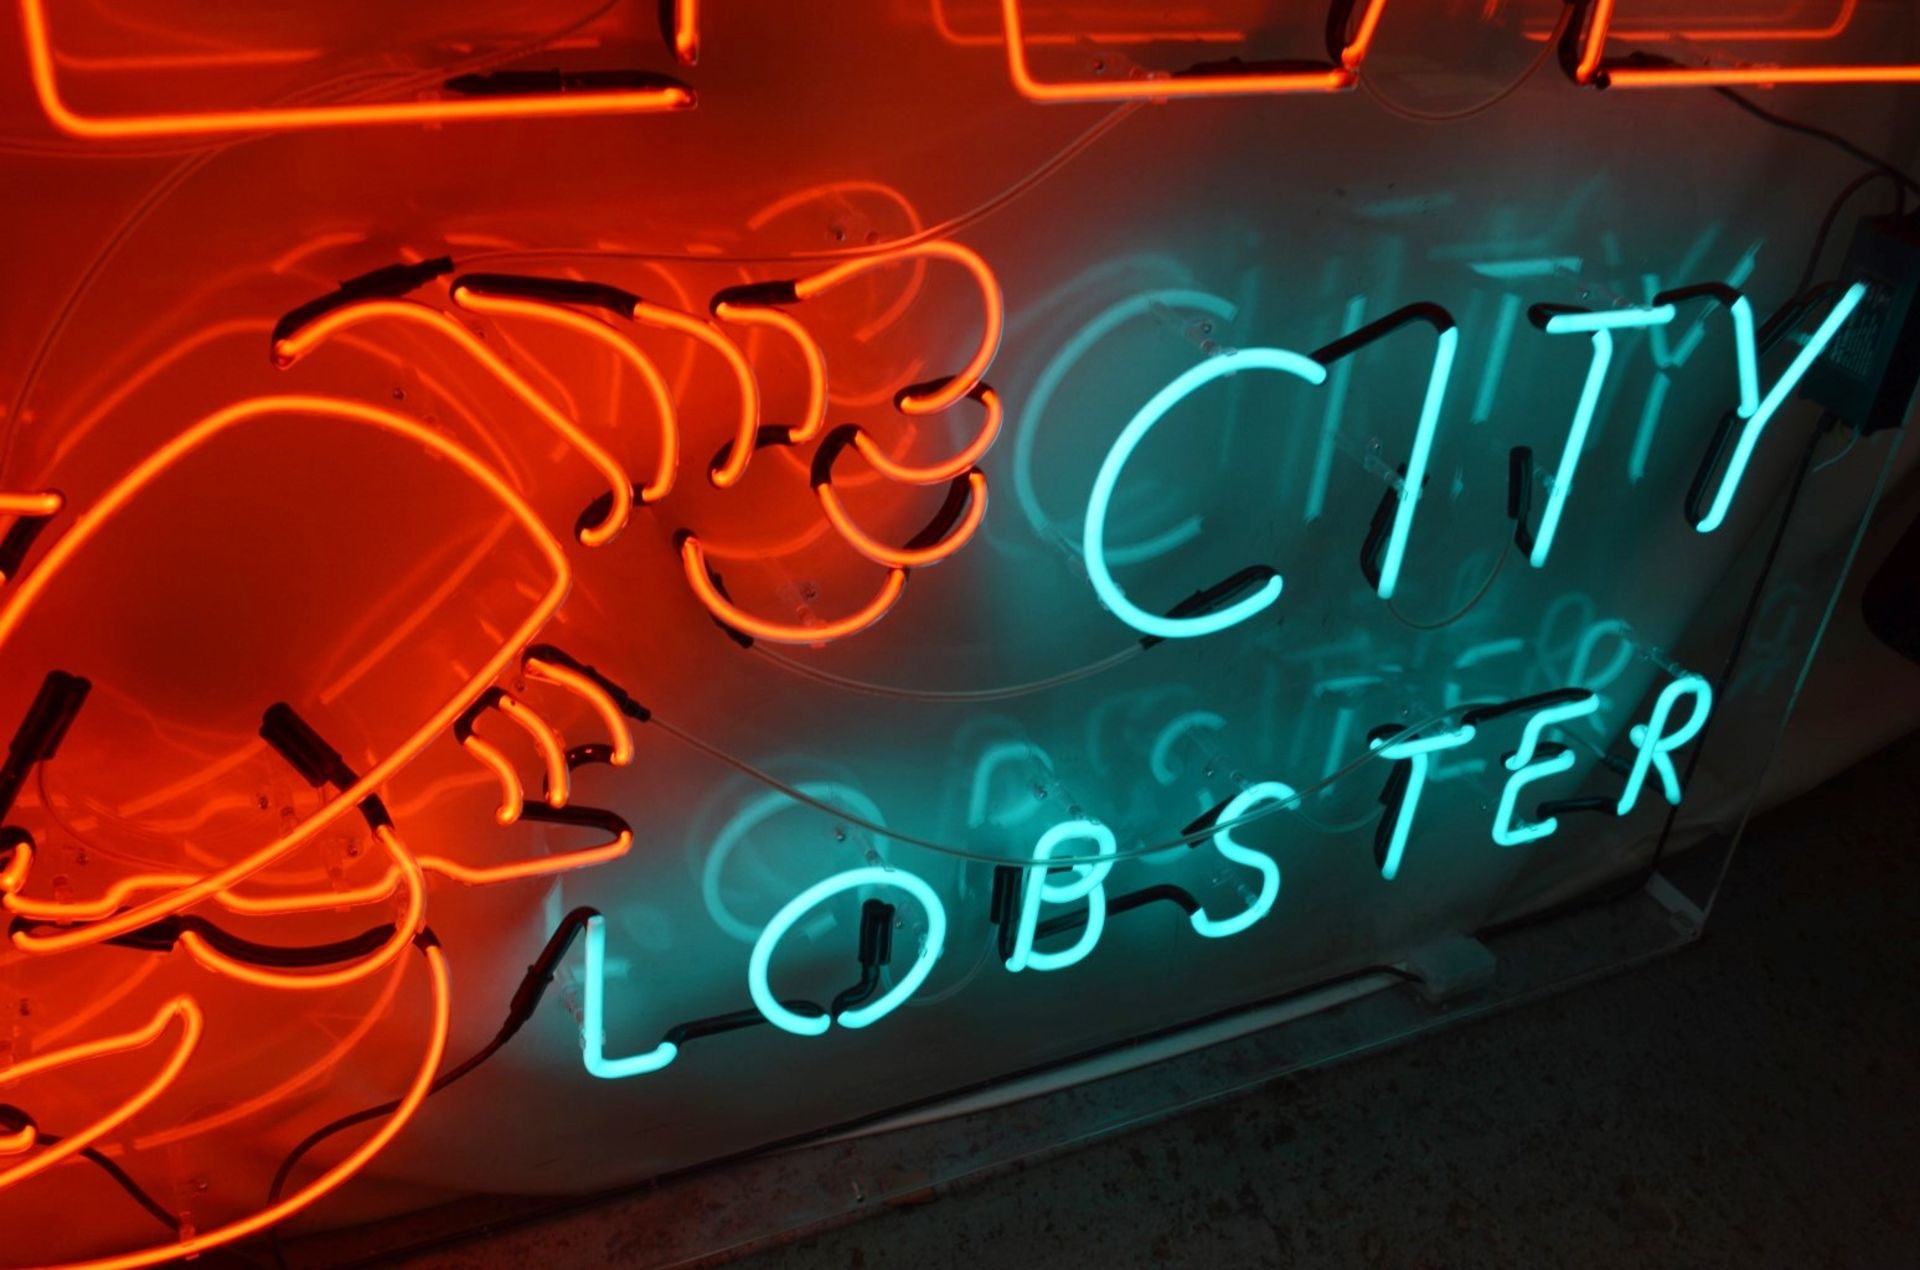 1 x 'LIVE CITY LOBSTER' Neon Sign - 1.8 Metres Wide - Recently Removed From A City Centre Restaurant - Image 6 of 7